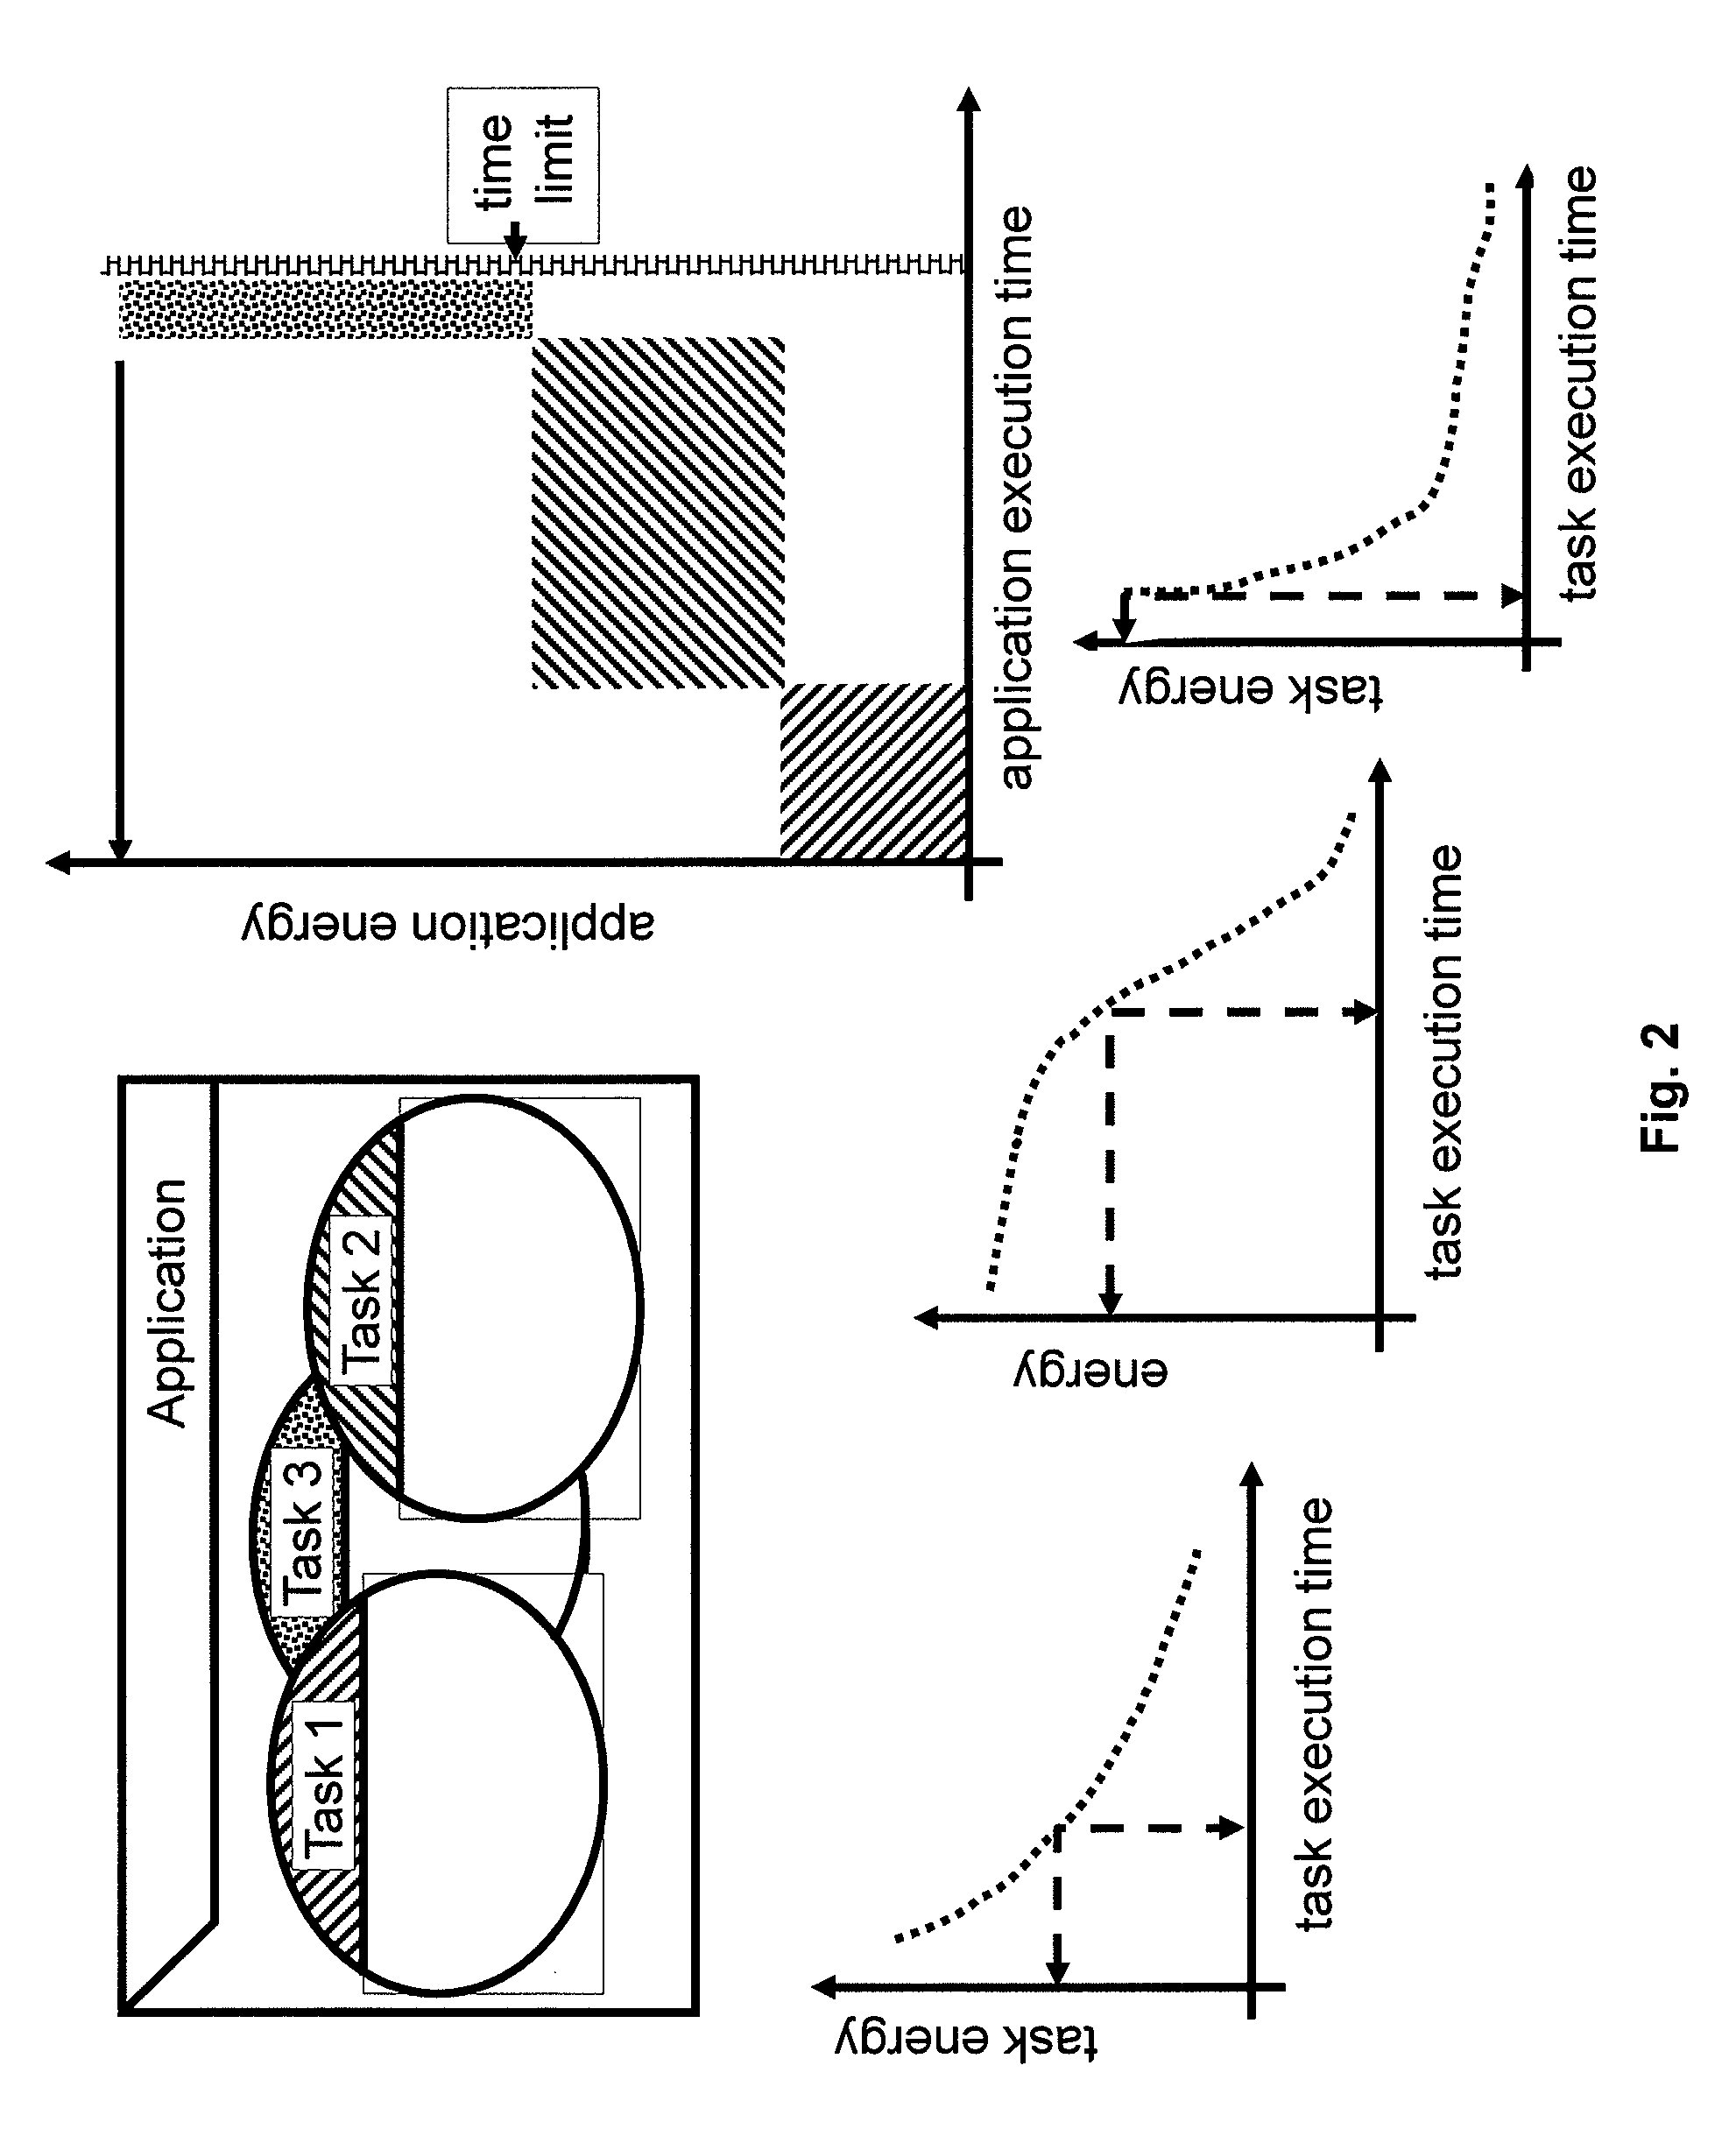 Method and apparatus for designing and manufacturing electronic circuits subject to leakage problems caused by temperature variations and/or aging